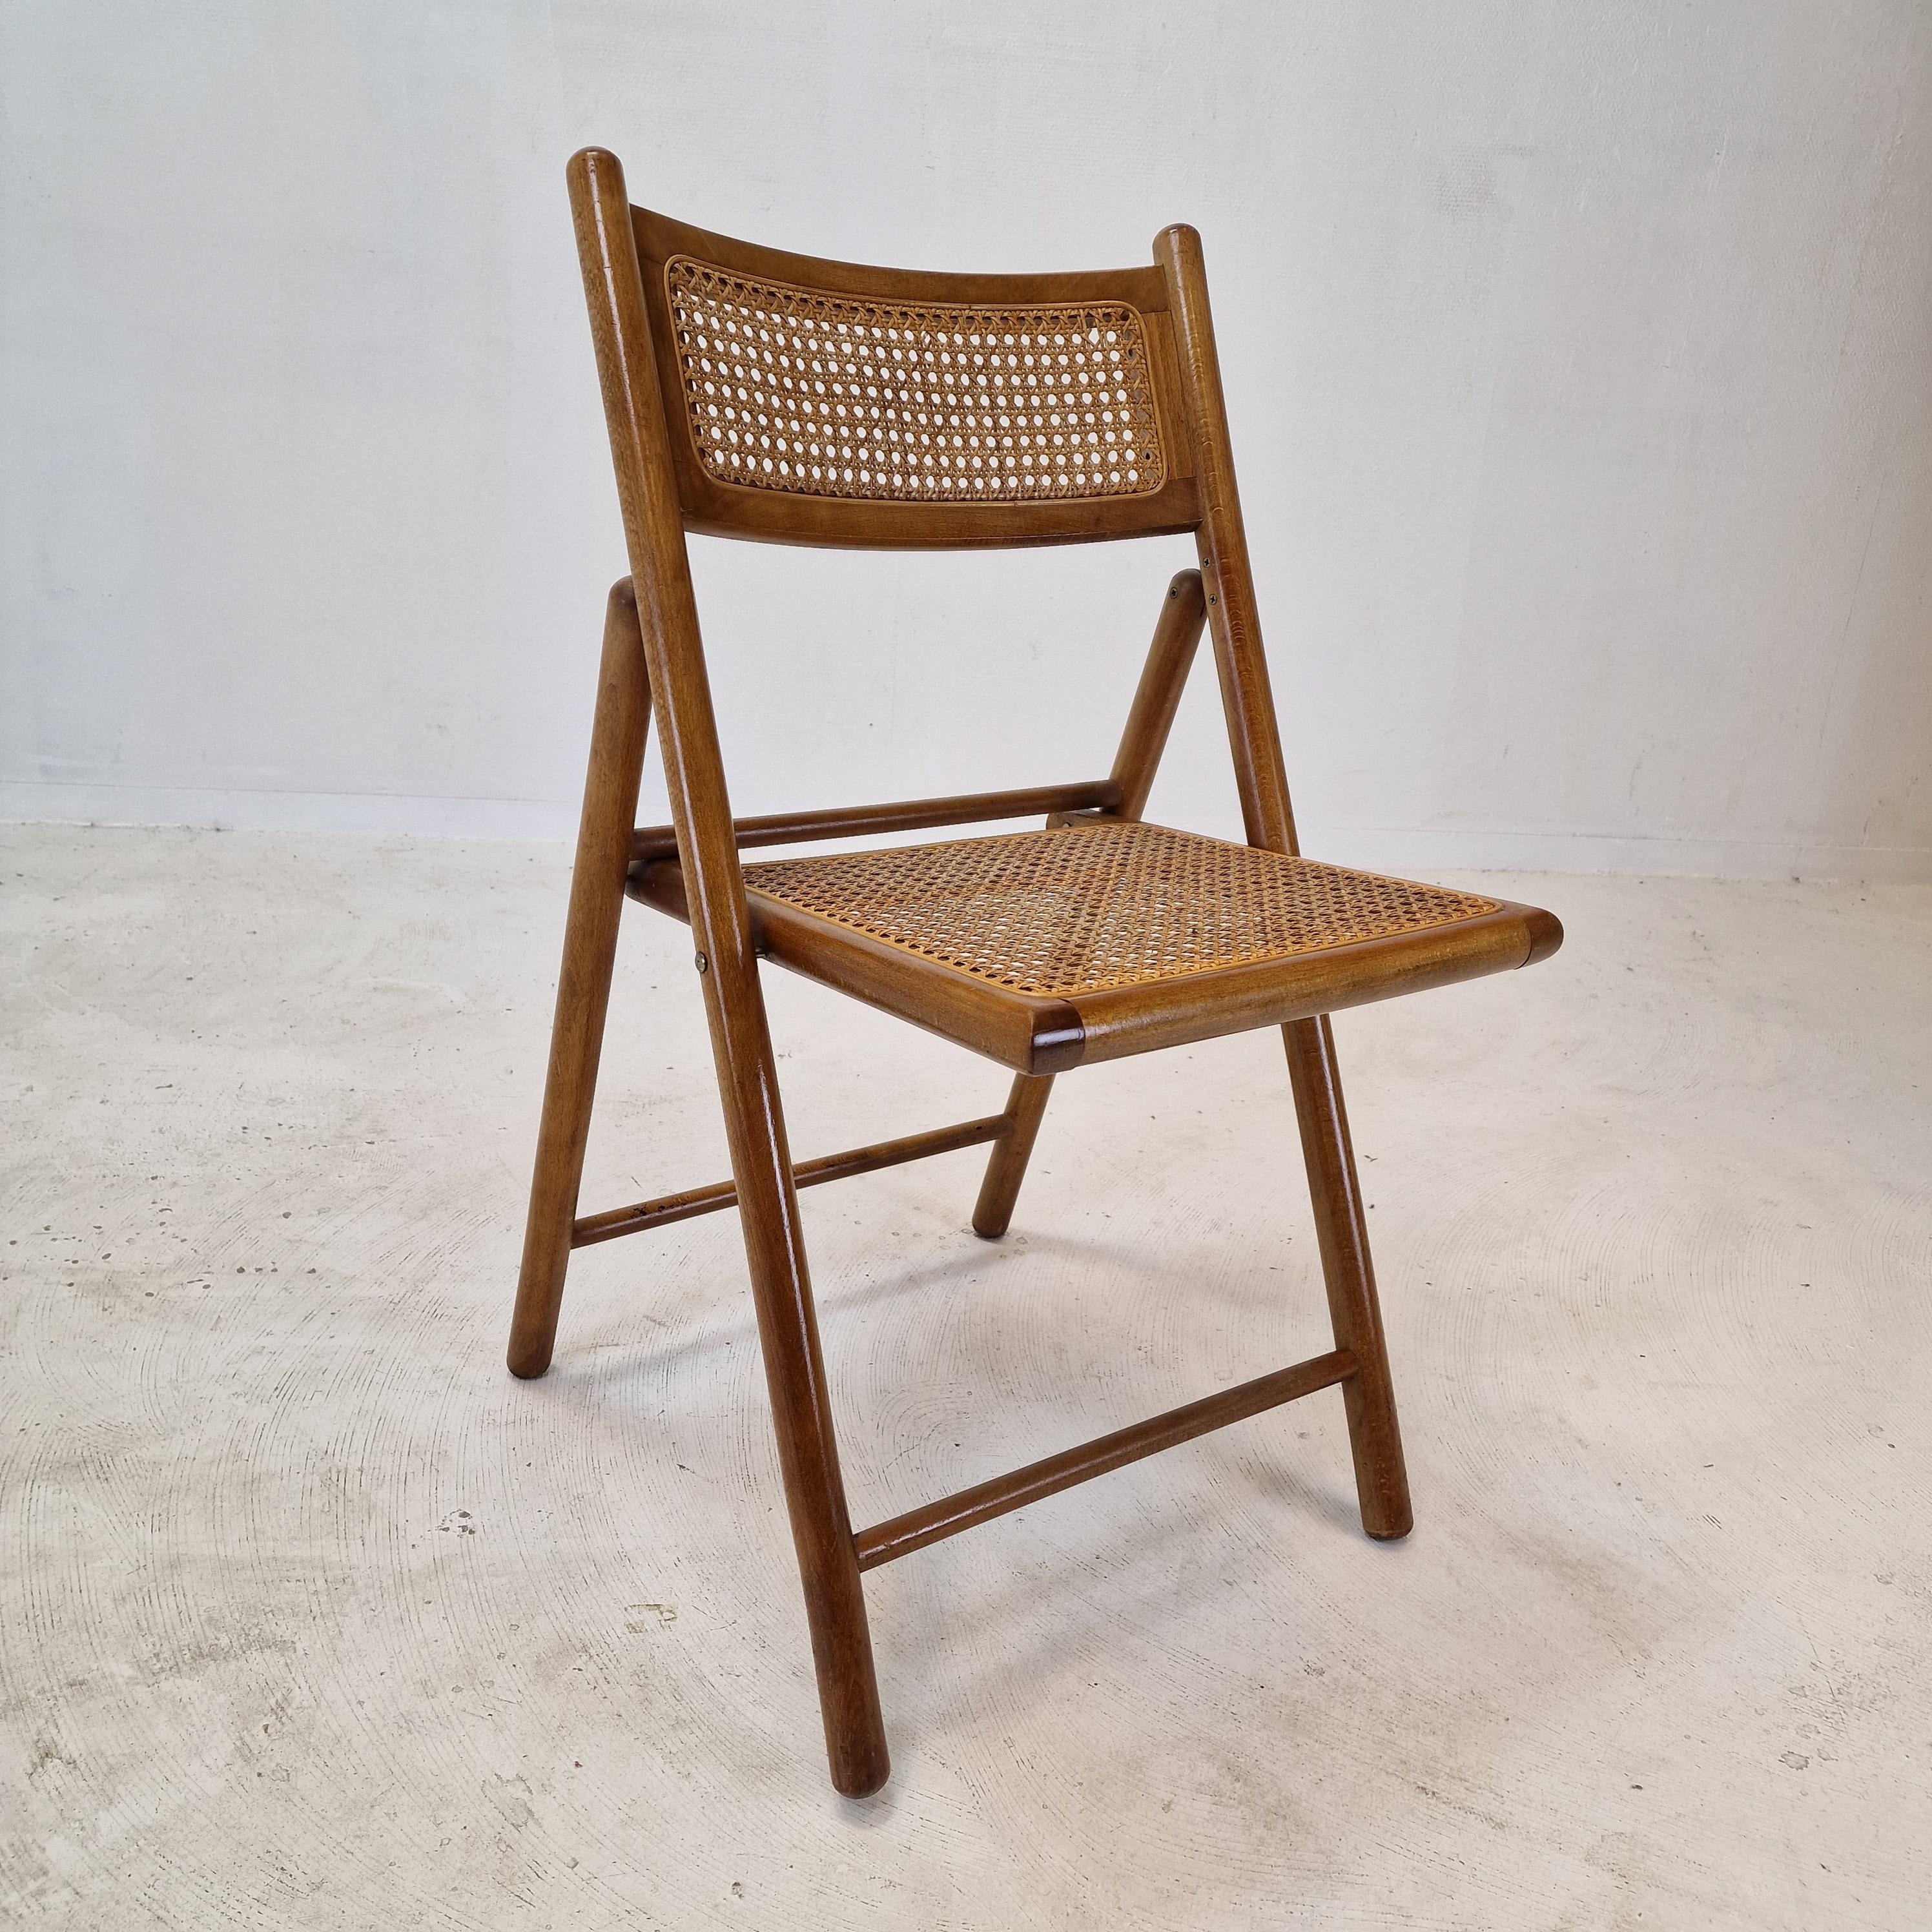 Set of 4 Italian Folding Chairs with Rattan, 1980s For Sale 8